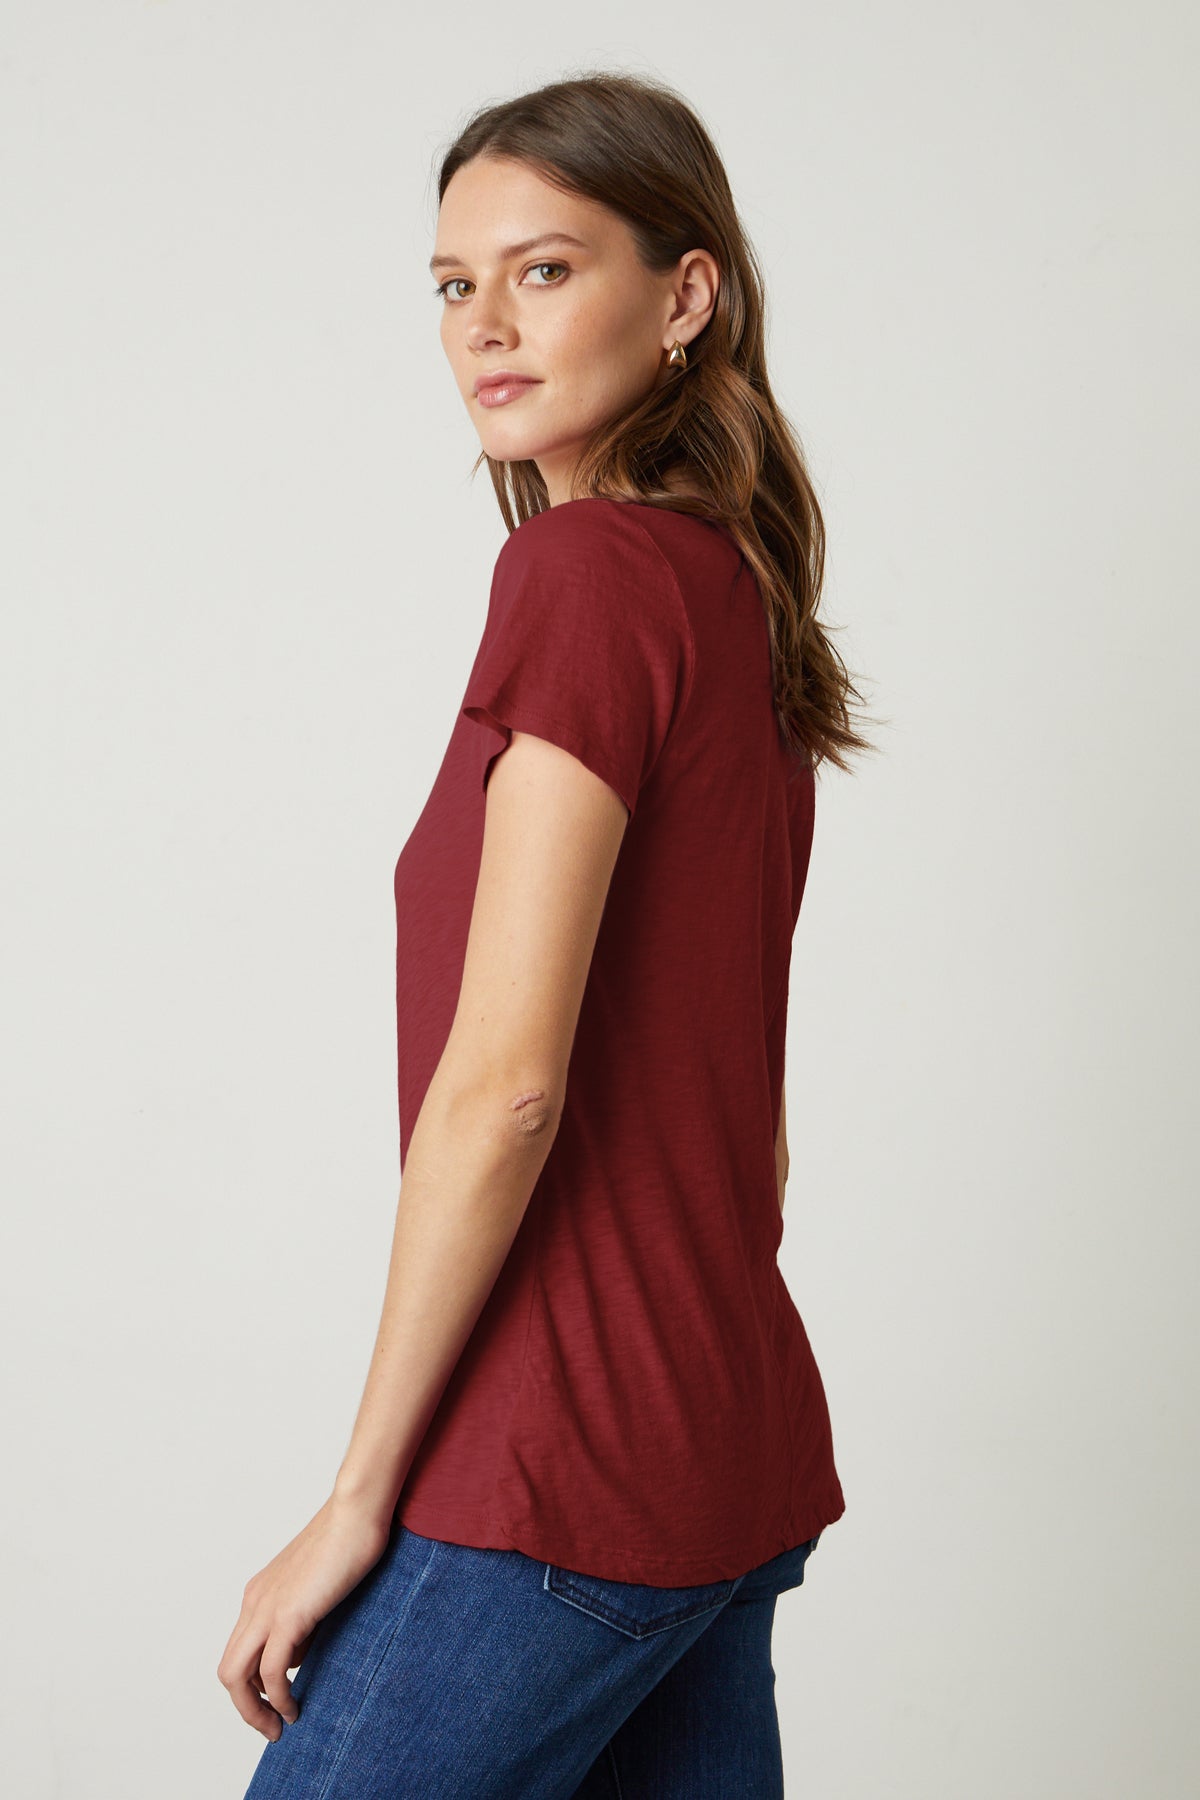 The back view of a woman wearing a Velvet by Graham & Spencer LILITH COTTON SLUB V-NECK TEE.-35782982303937